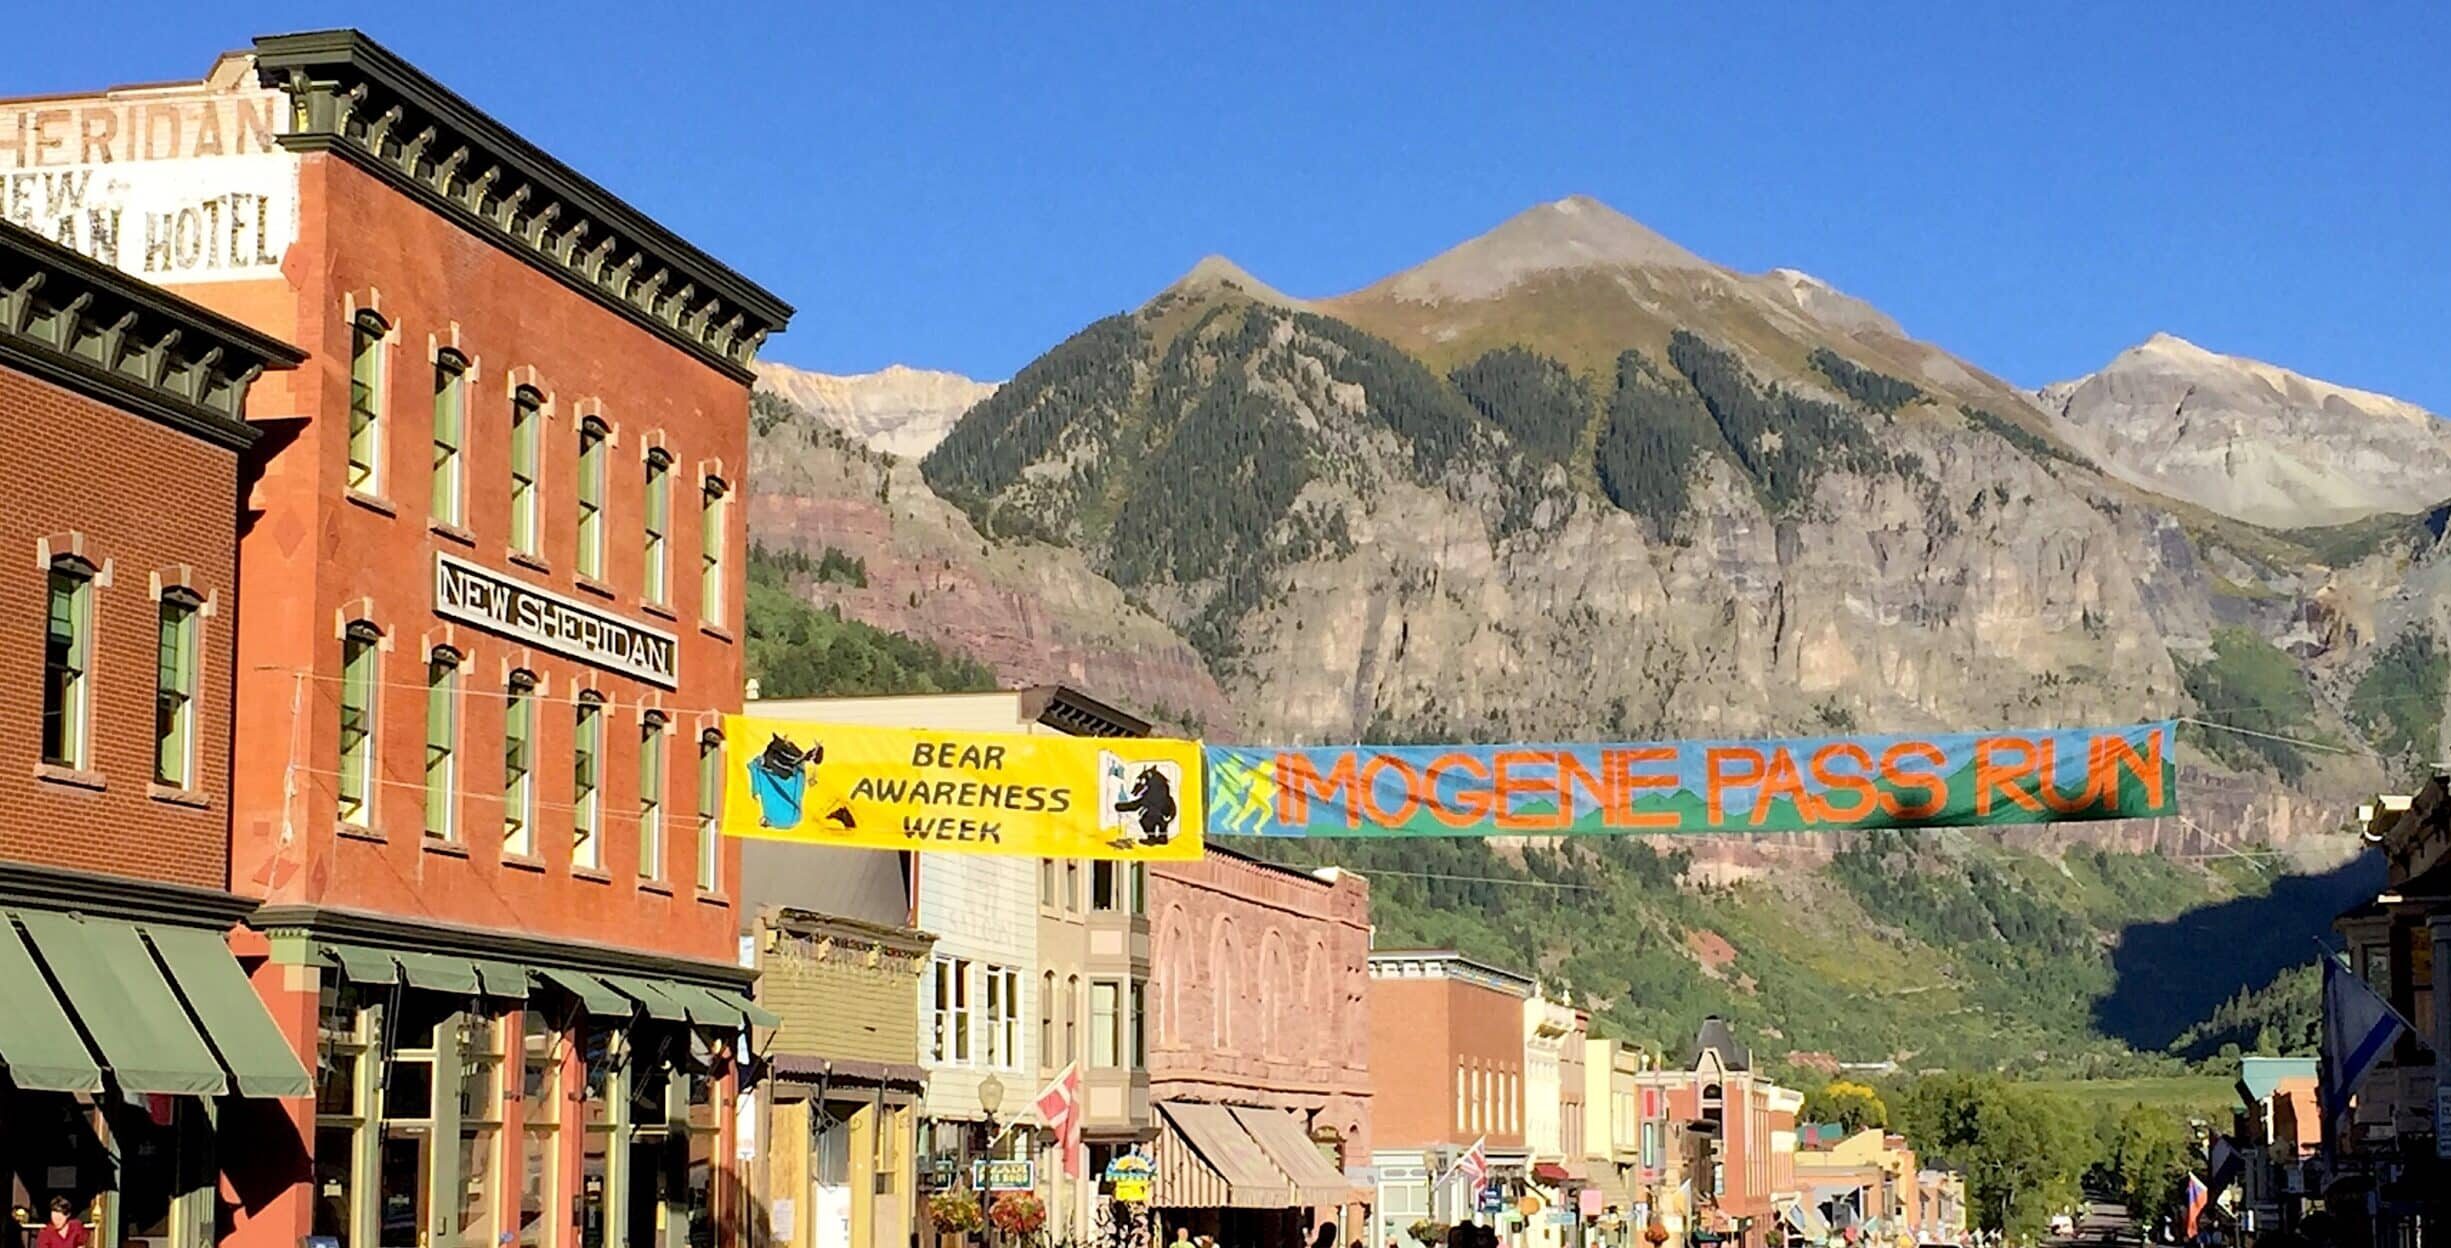 Telluride; from on Slow Down, See More from Telluride's Historic Downtown for the Cultural Explorer on Slow Down, See More from Telluride's Historic Downtown, A Cultural Exploration on Slow Down, See More